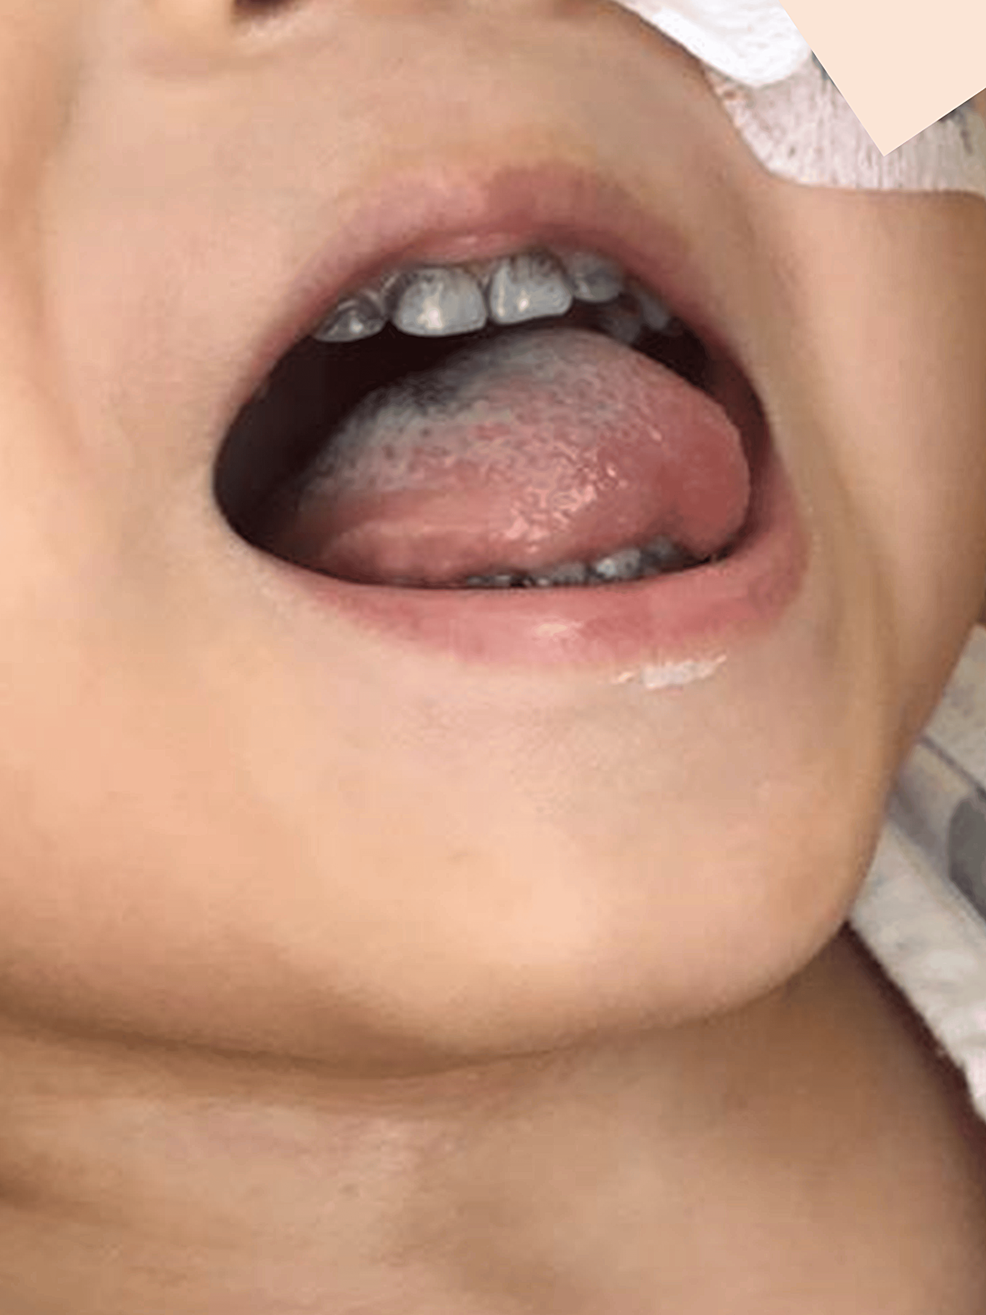 Tooth-discoloration-during-meropenem-and-vancomycin-therapy-in-case-2.